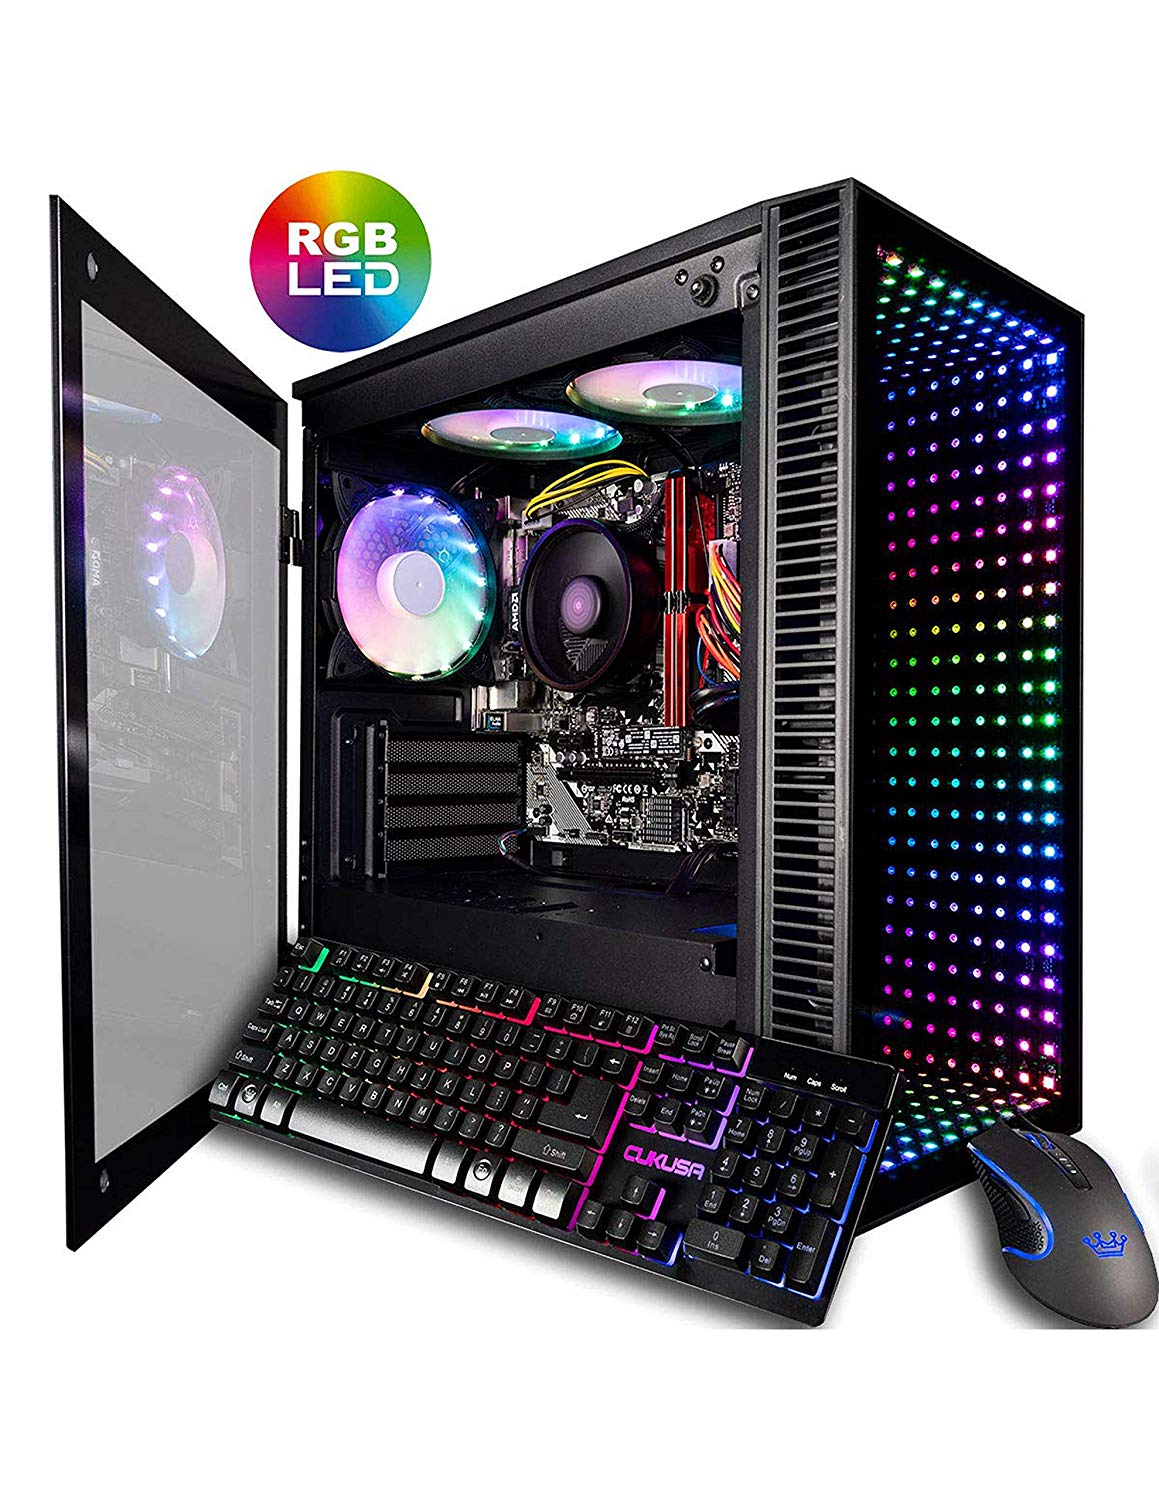 Corner What Is The Best Cheap Pc Build with RGB